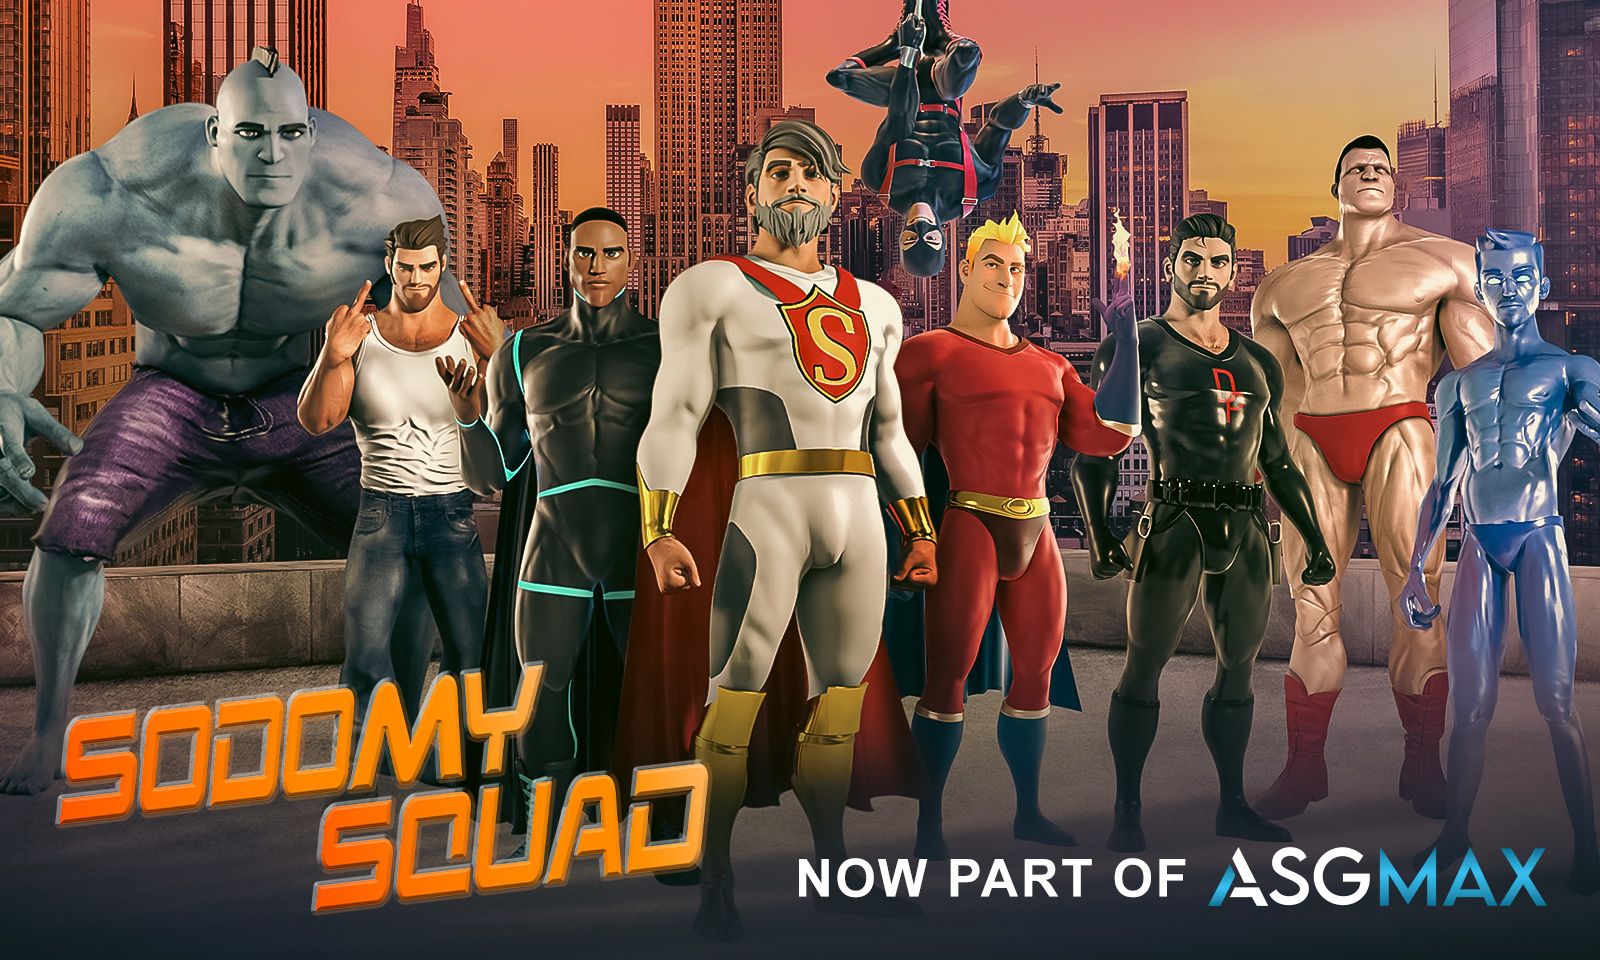 ASGmax Debuts First Animated Series 'Sodomy Squad'